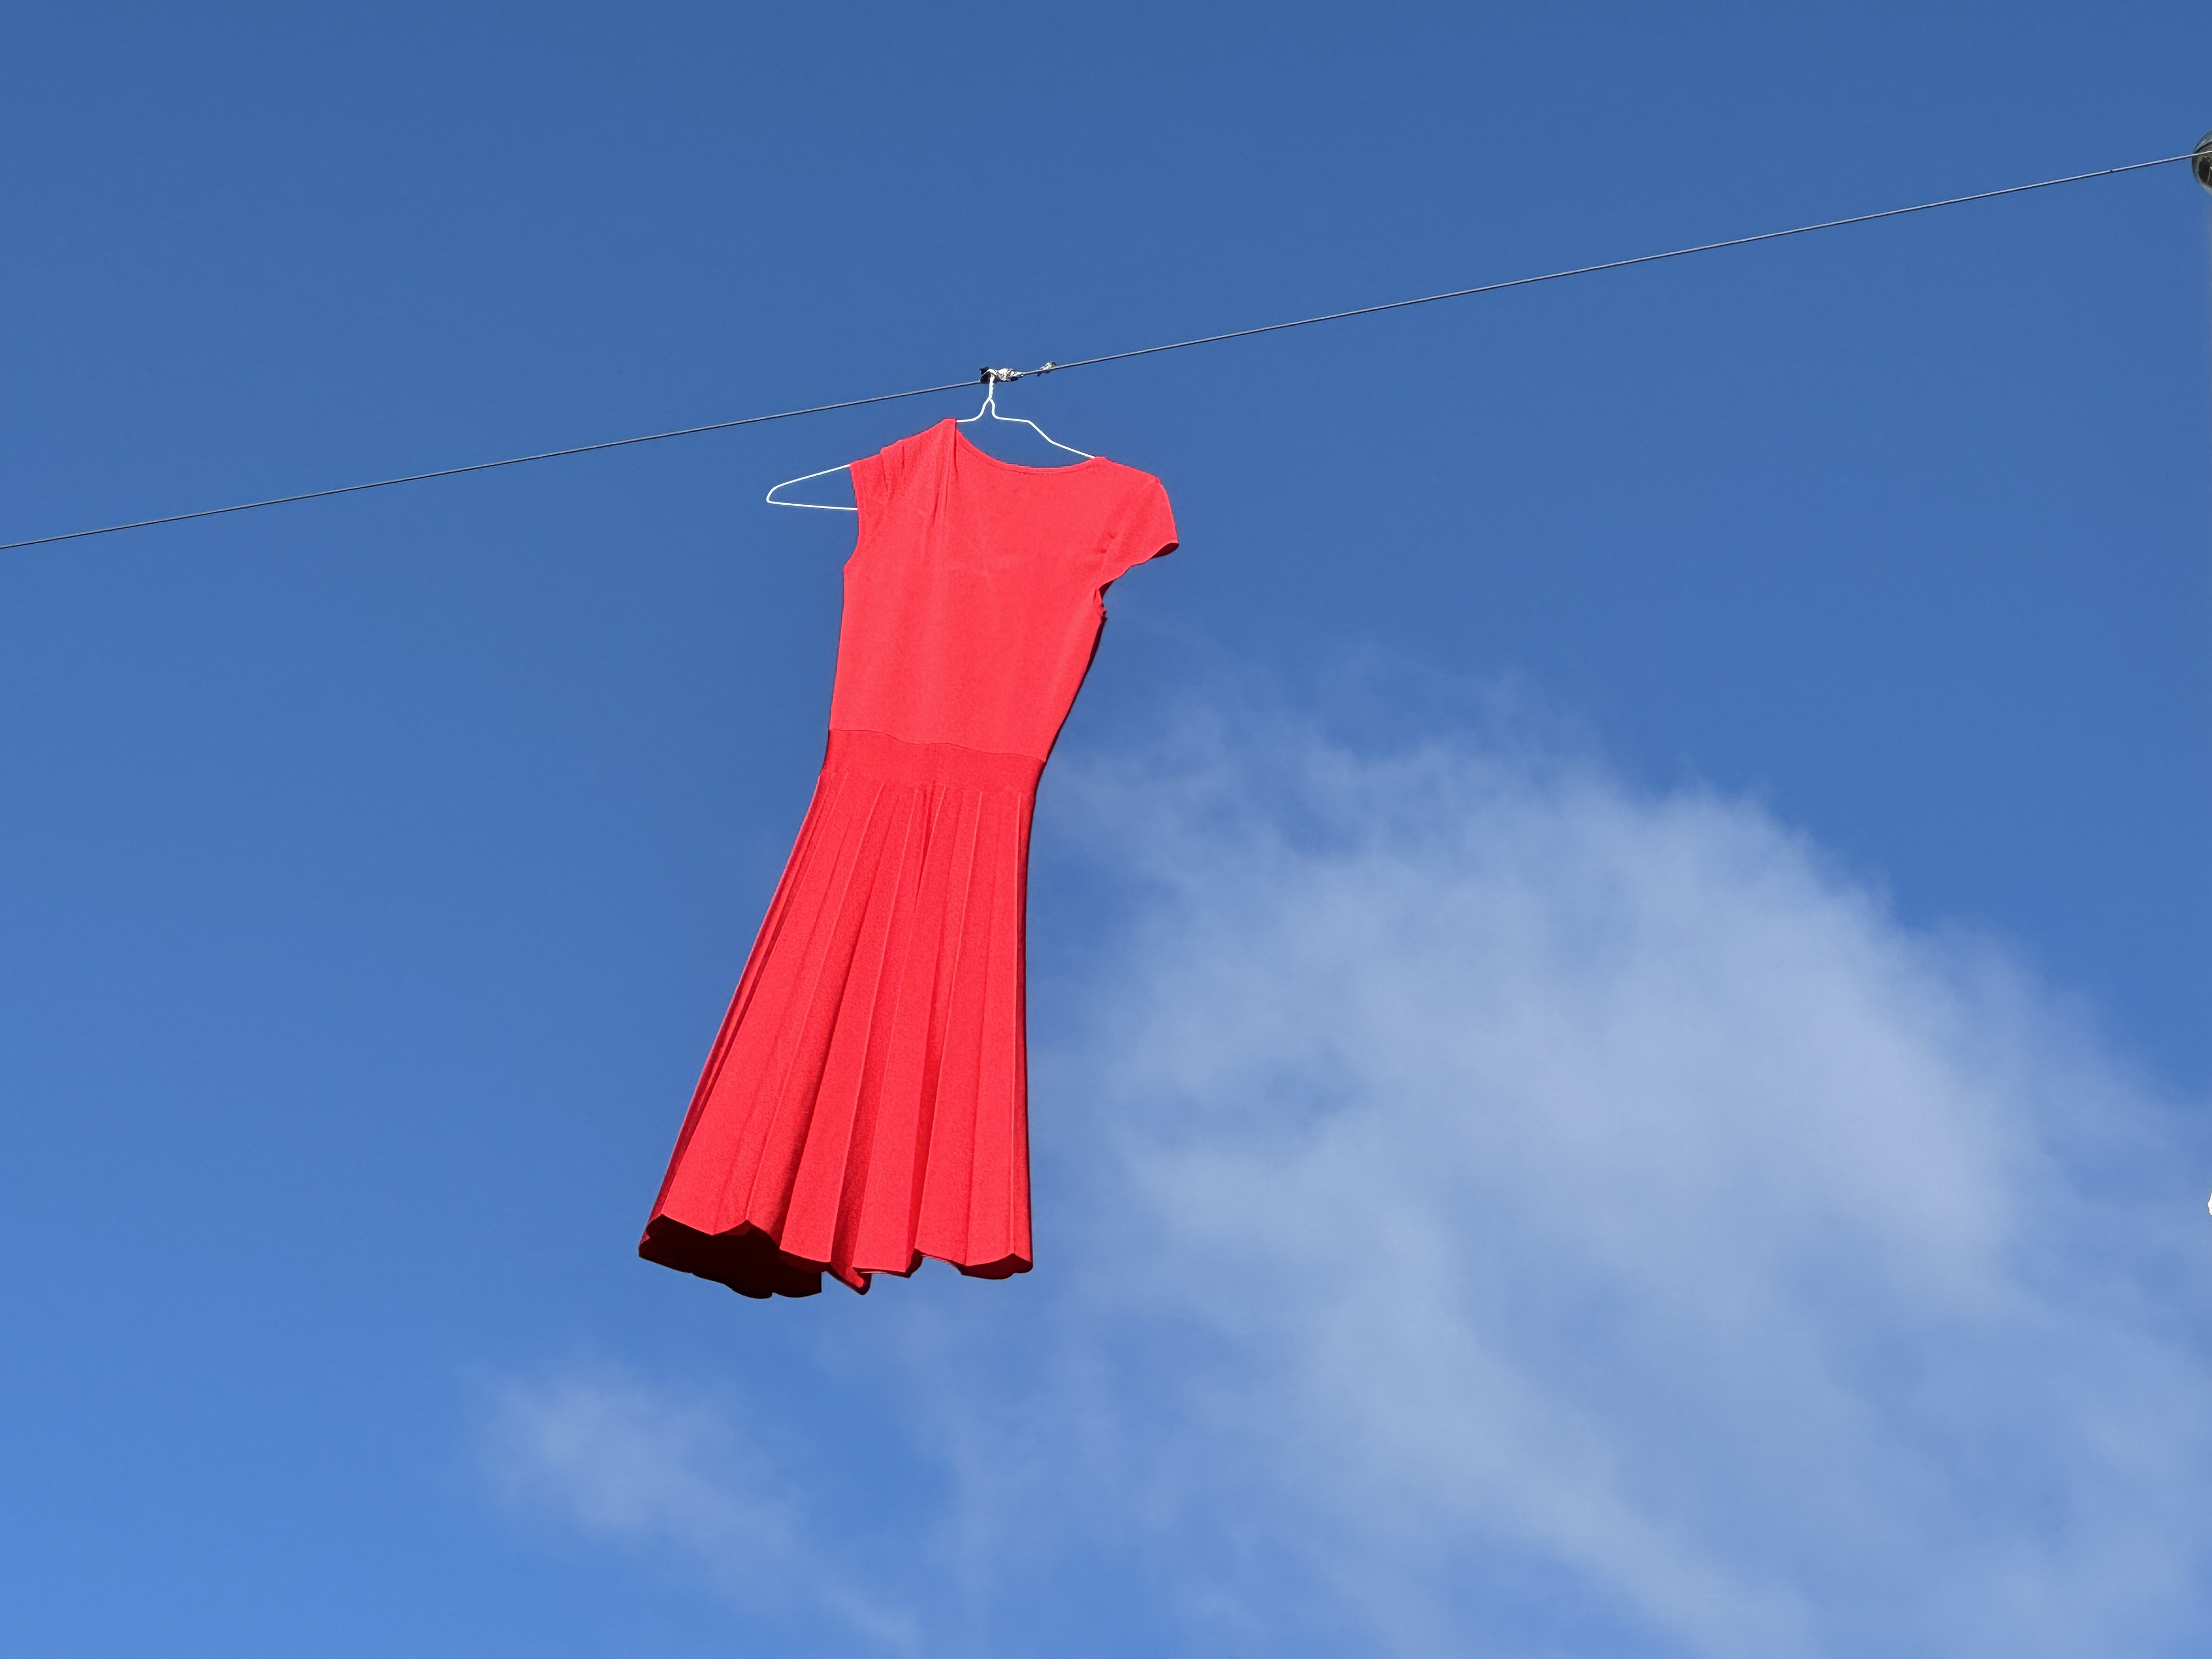 Red Dress blowing in the wind with a blue sly behind.